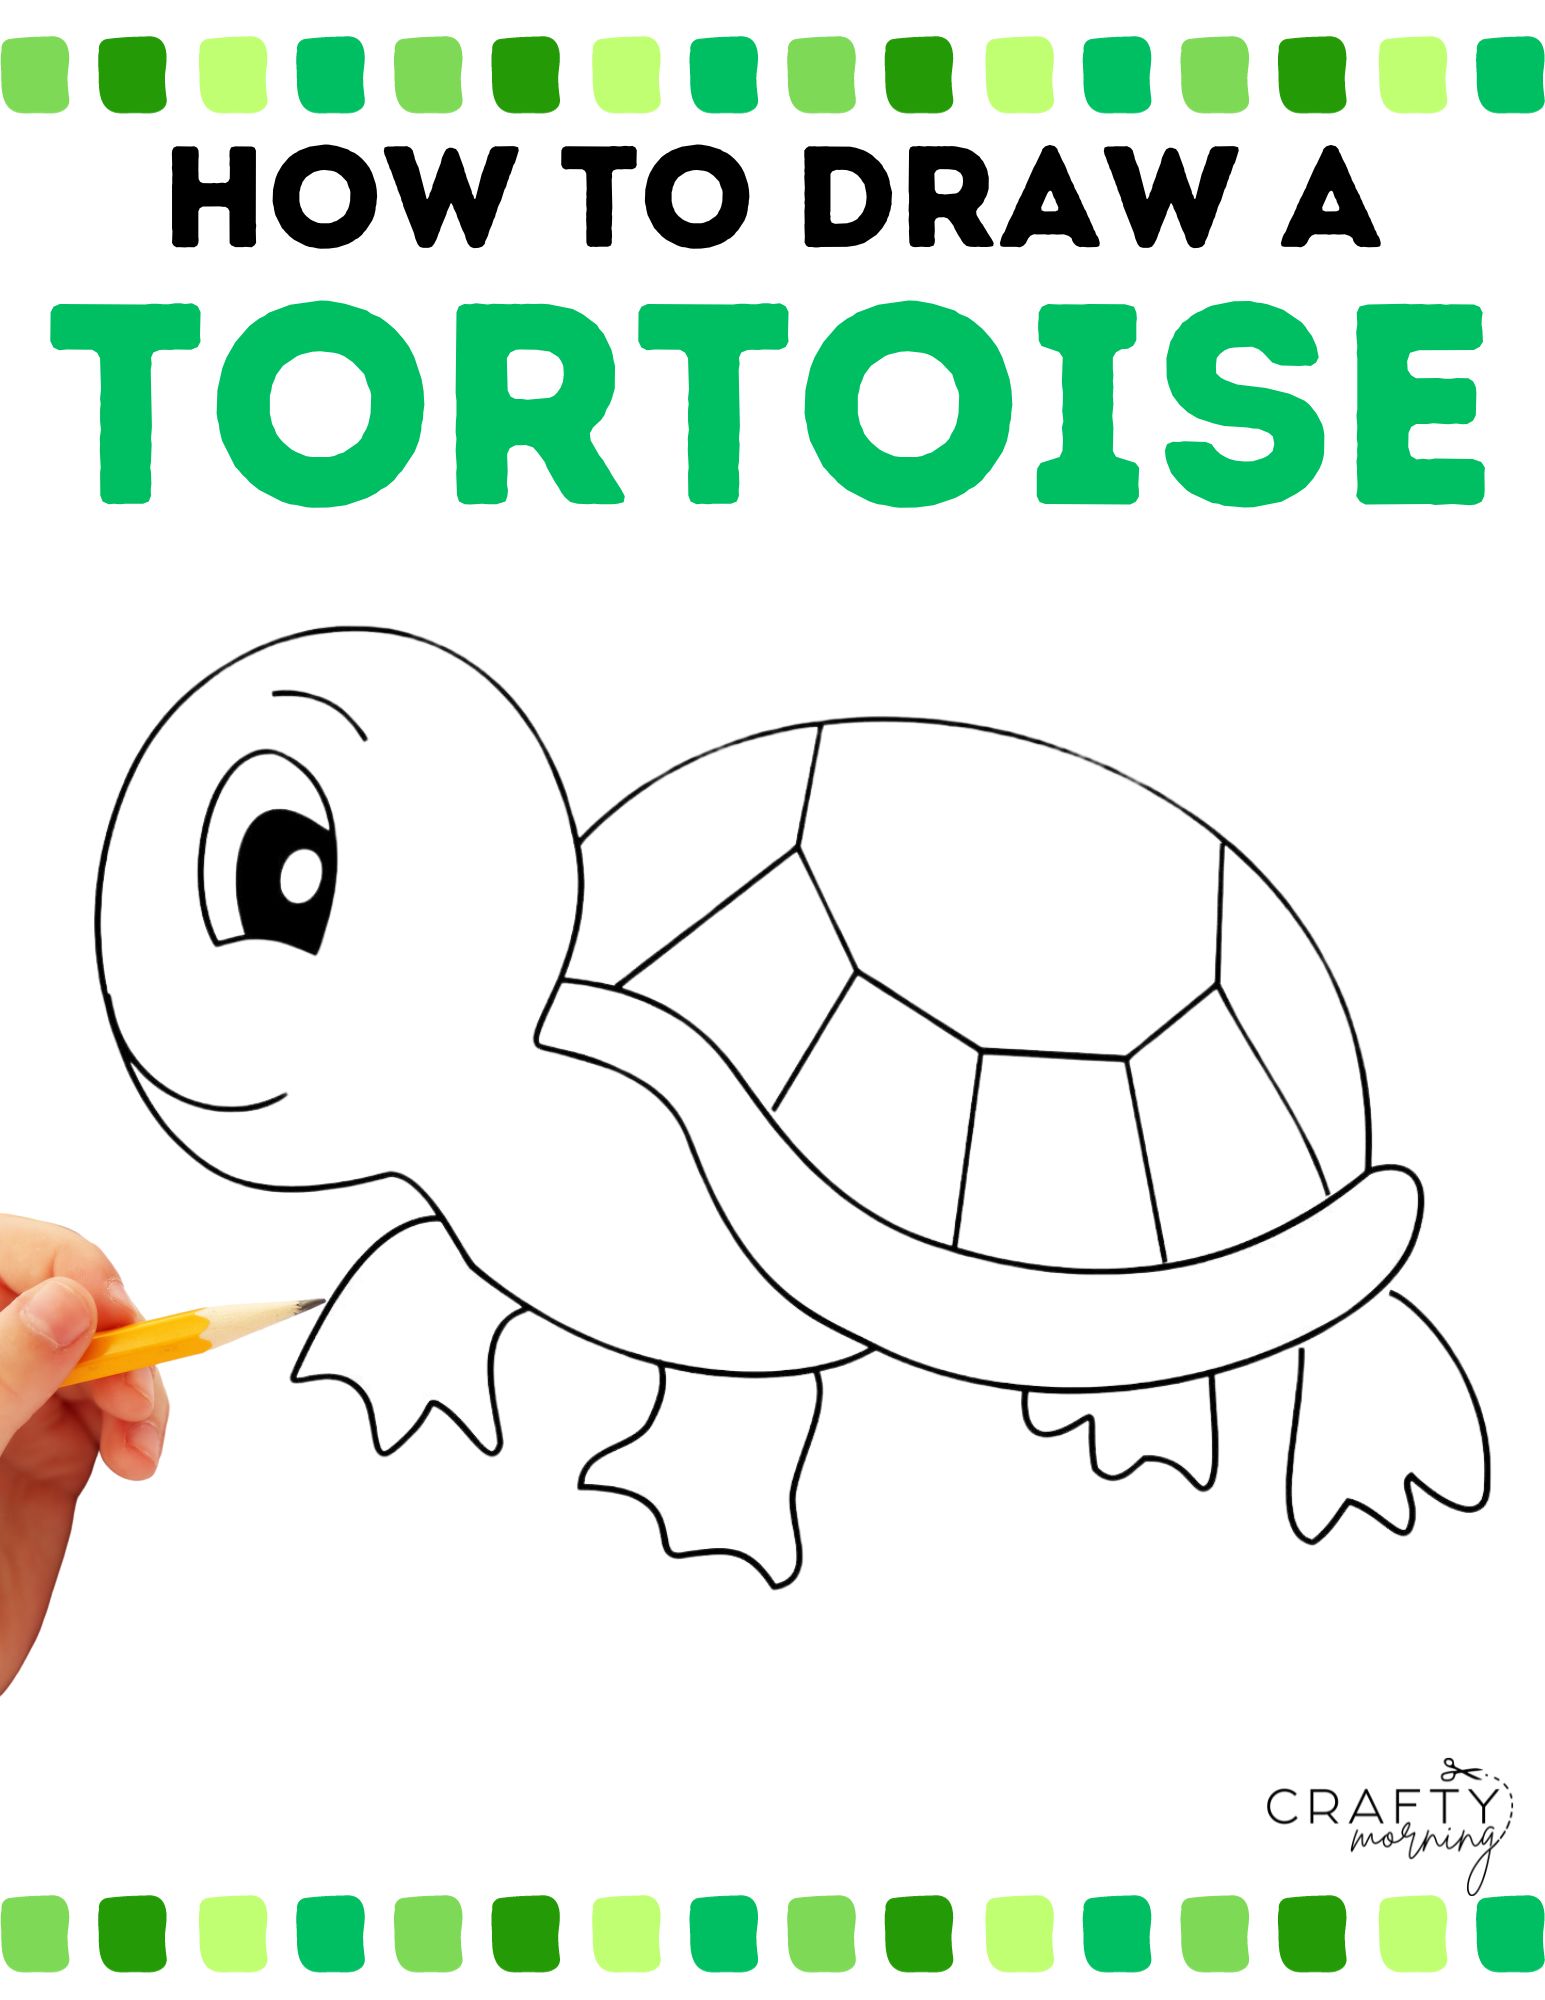 Turtle drawing | How to Draw a Tortoise for kids - YouTube